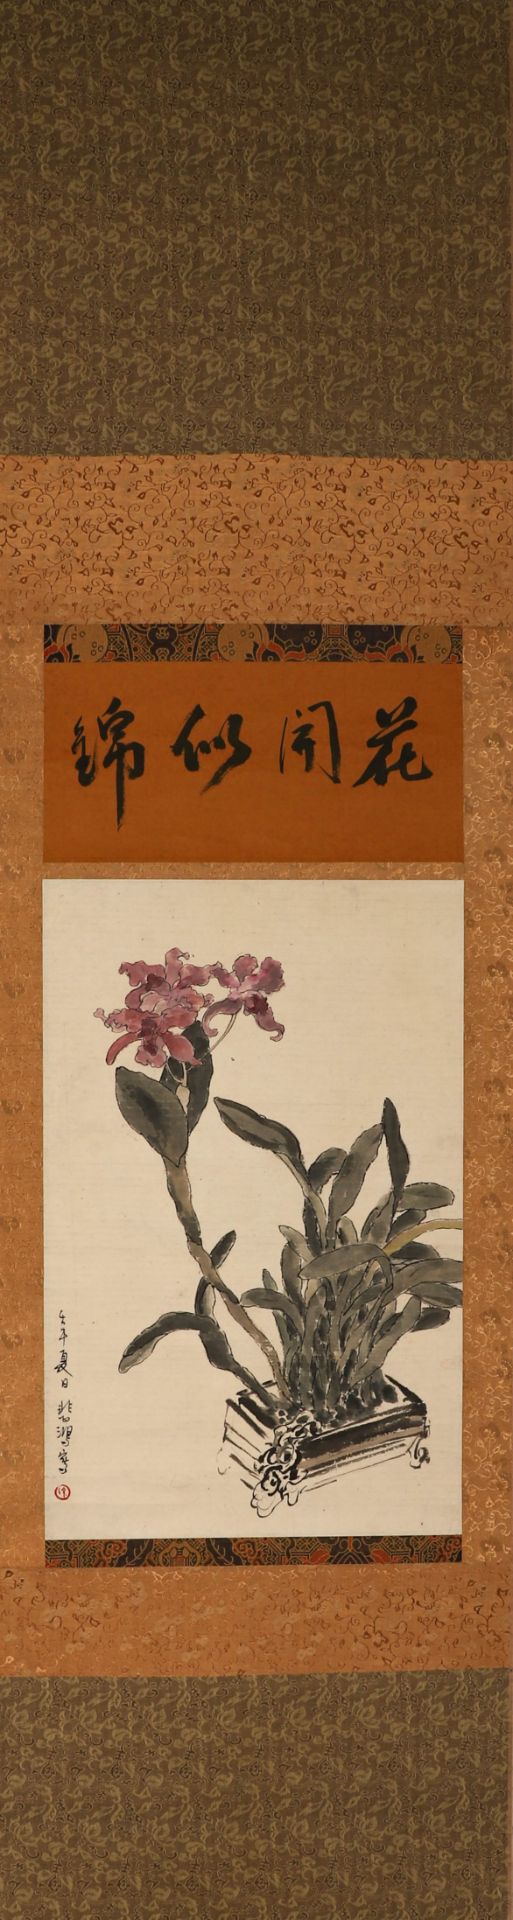 Flowers painting on paper by Xu Beihong  - Image 9 of 22